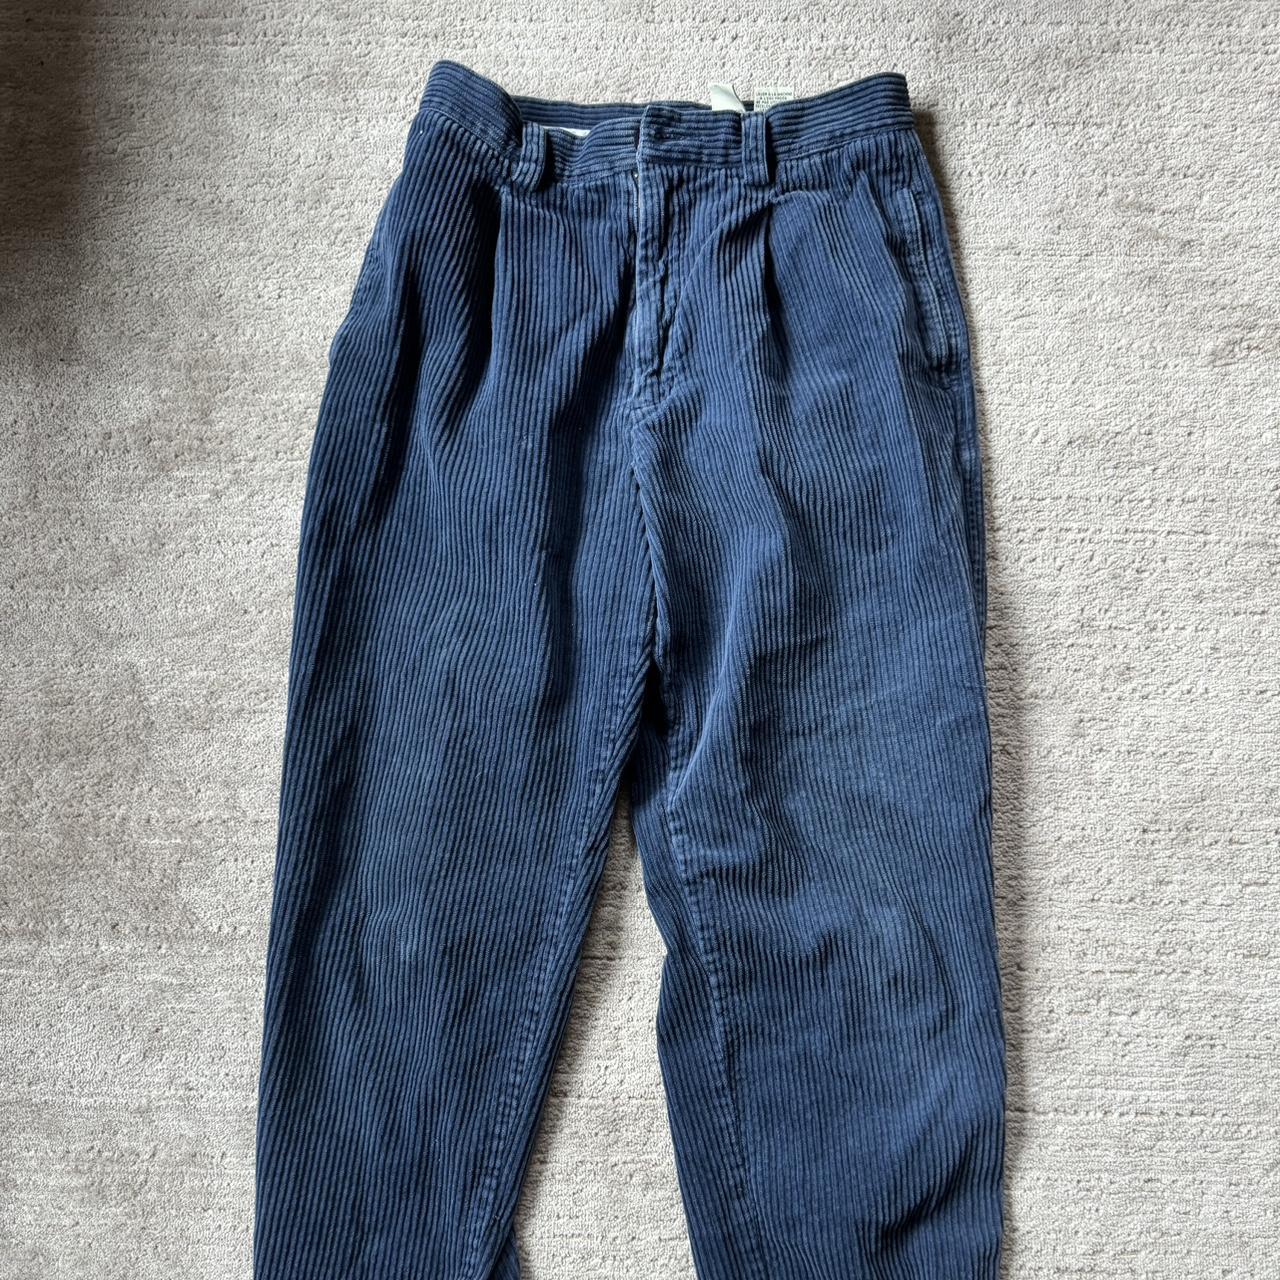 A •NEW DAY Stretch Corduroy Pants in Navy Blue Super - Depop